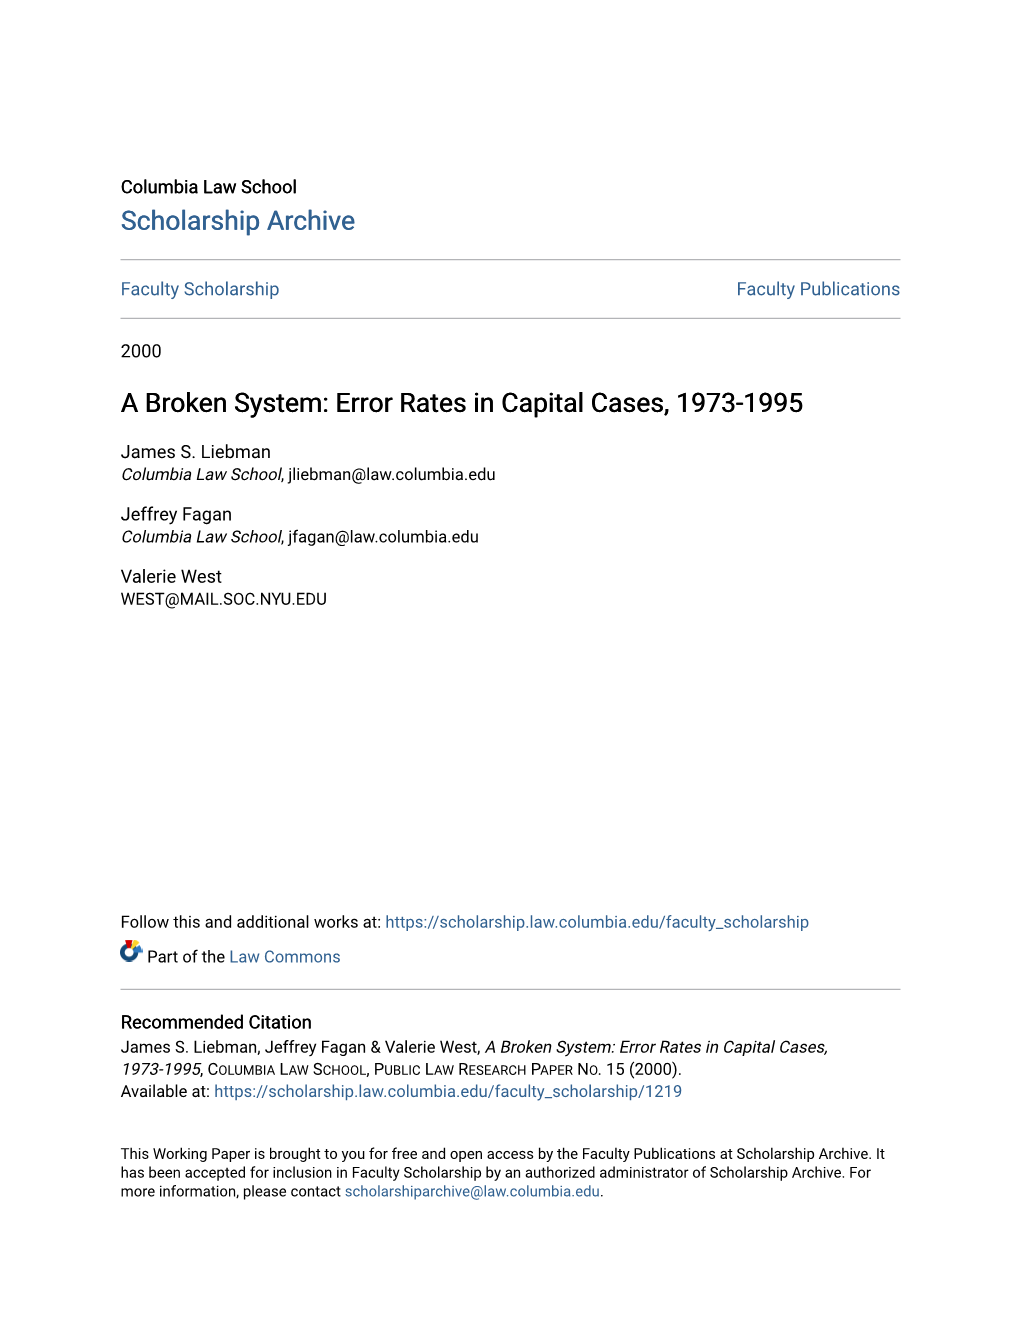 A Broken System: Error Rates in Capital Cases, 1973-1995